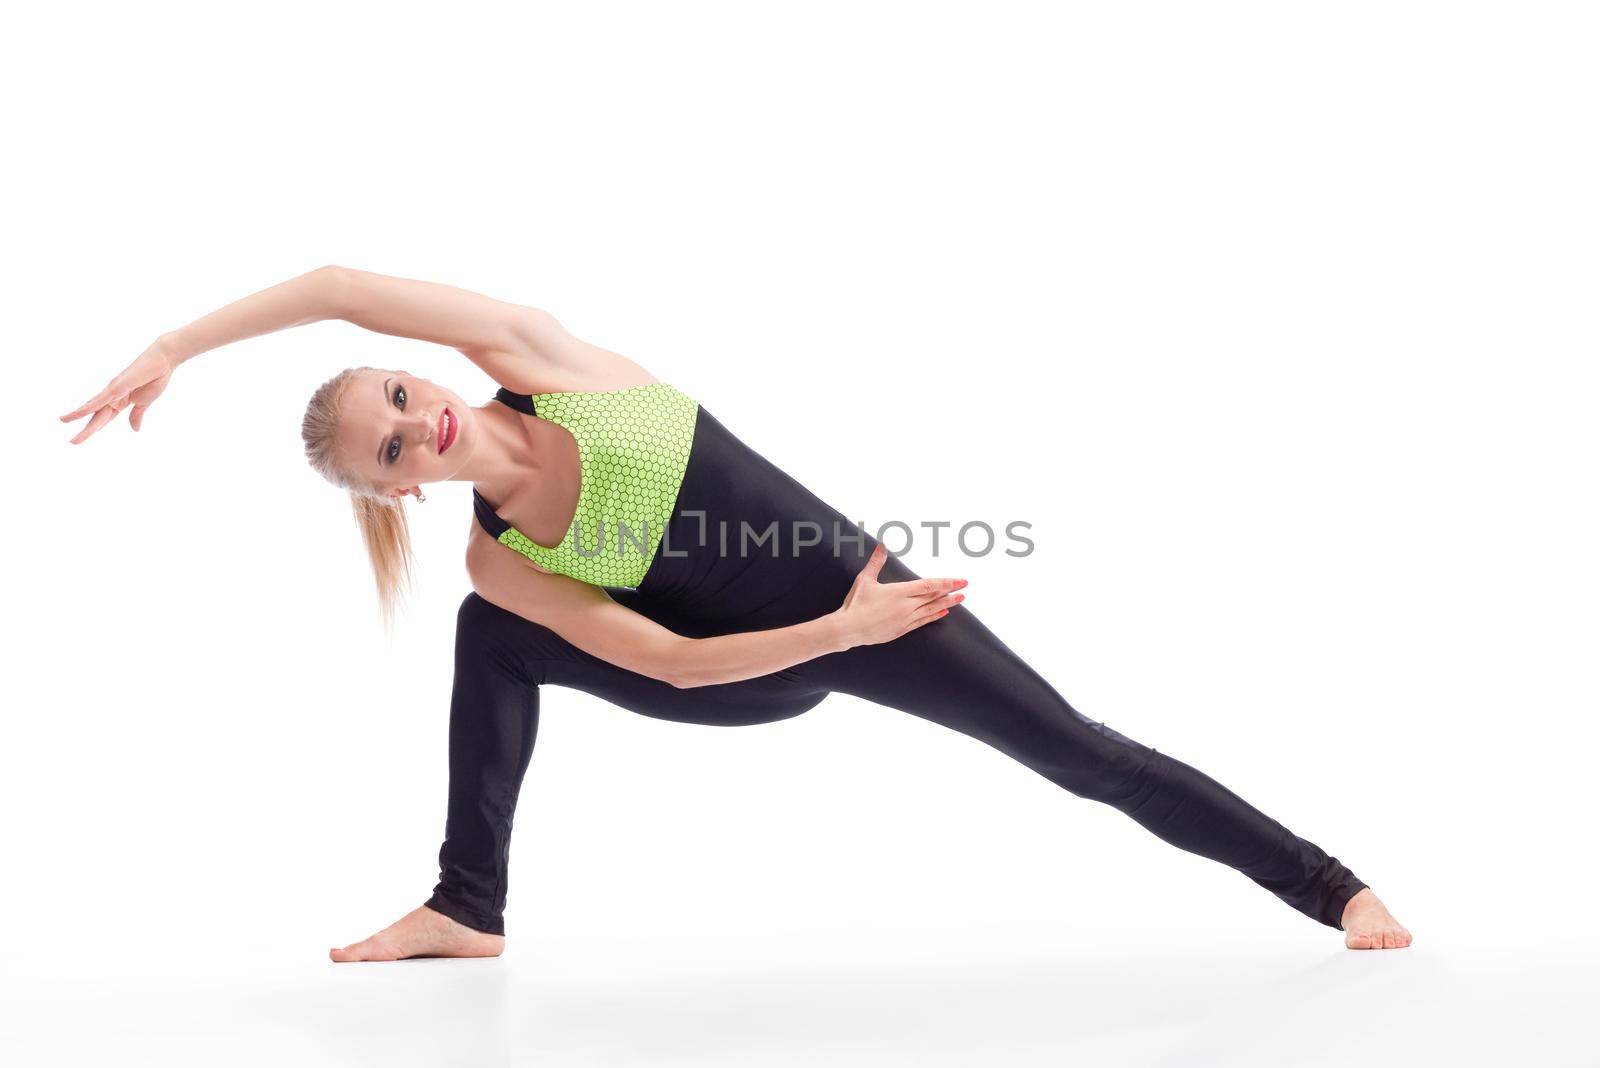 Stretching before gym. Beautiful cheerful woman smiling while stretching before exercising isolated copyspace sports gym vitality activity concept